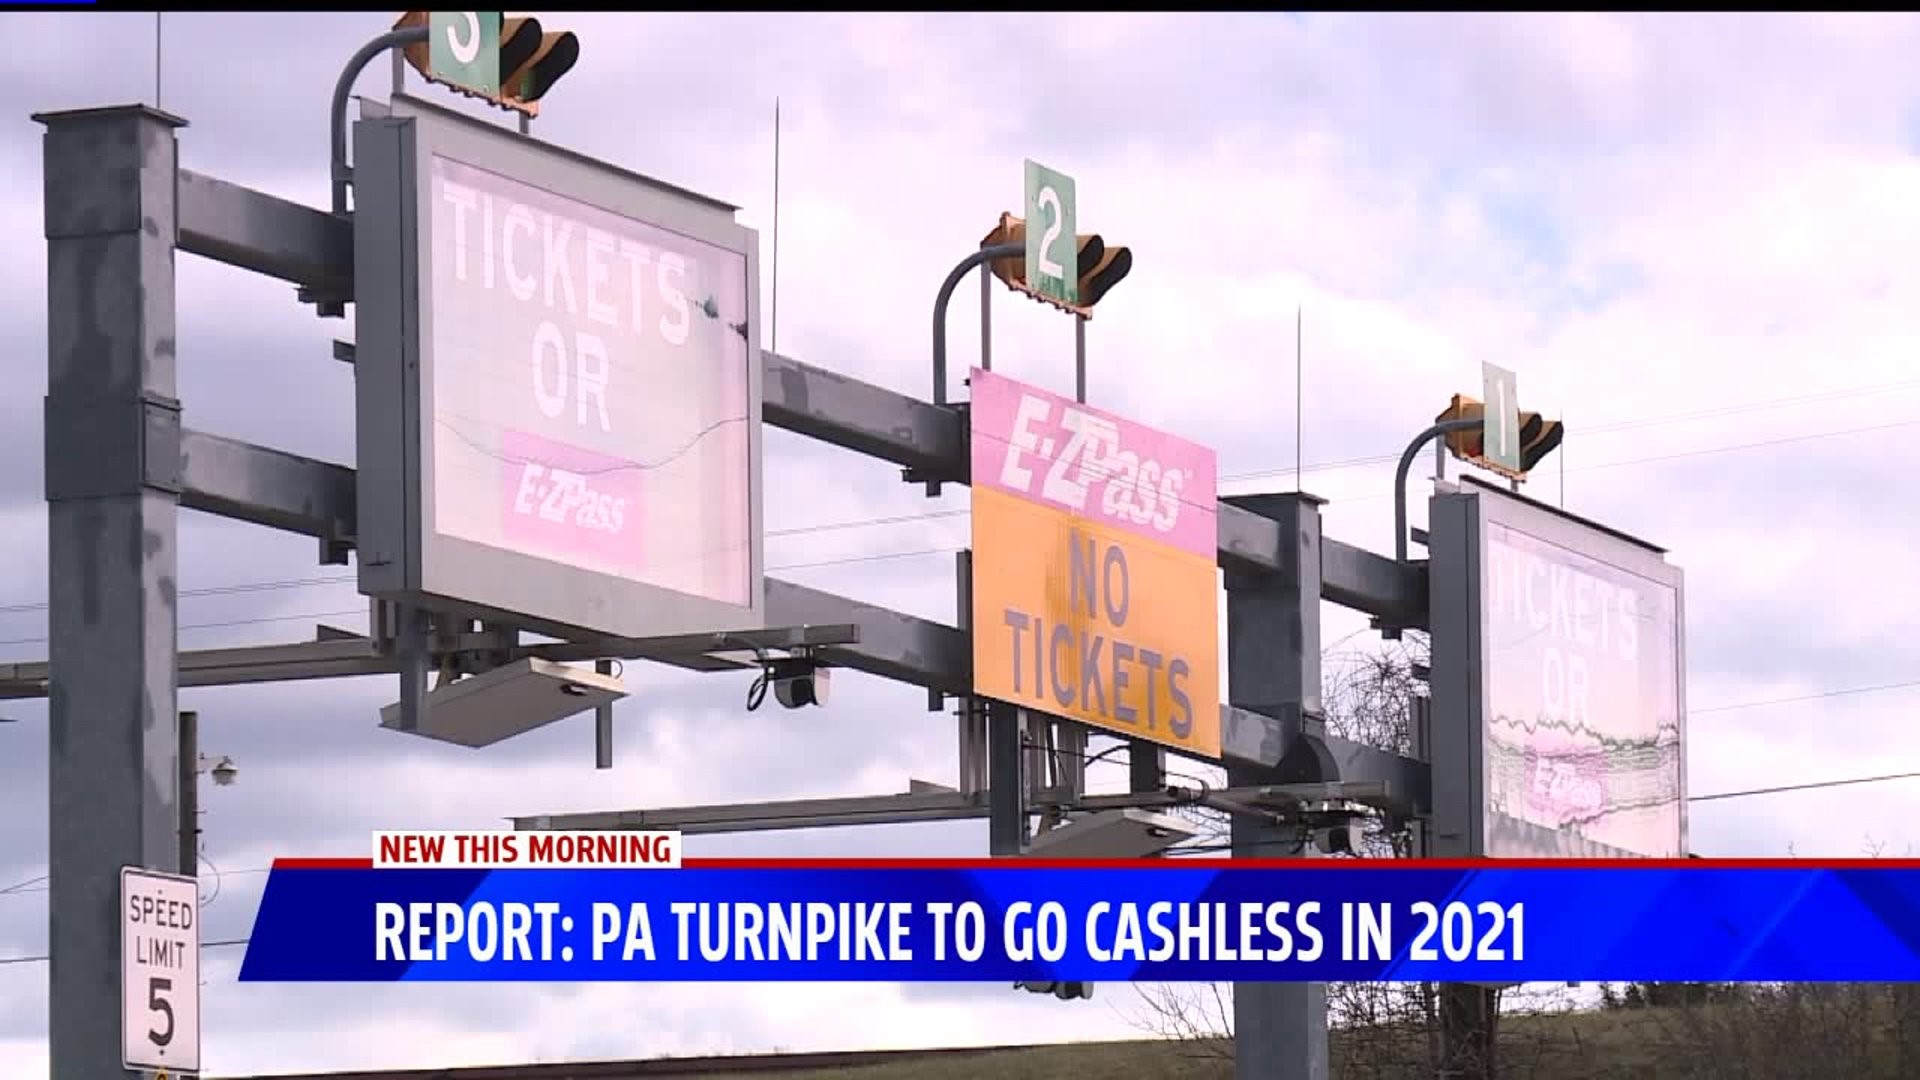 PA Turnpike to go cashless in 2021